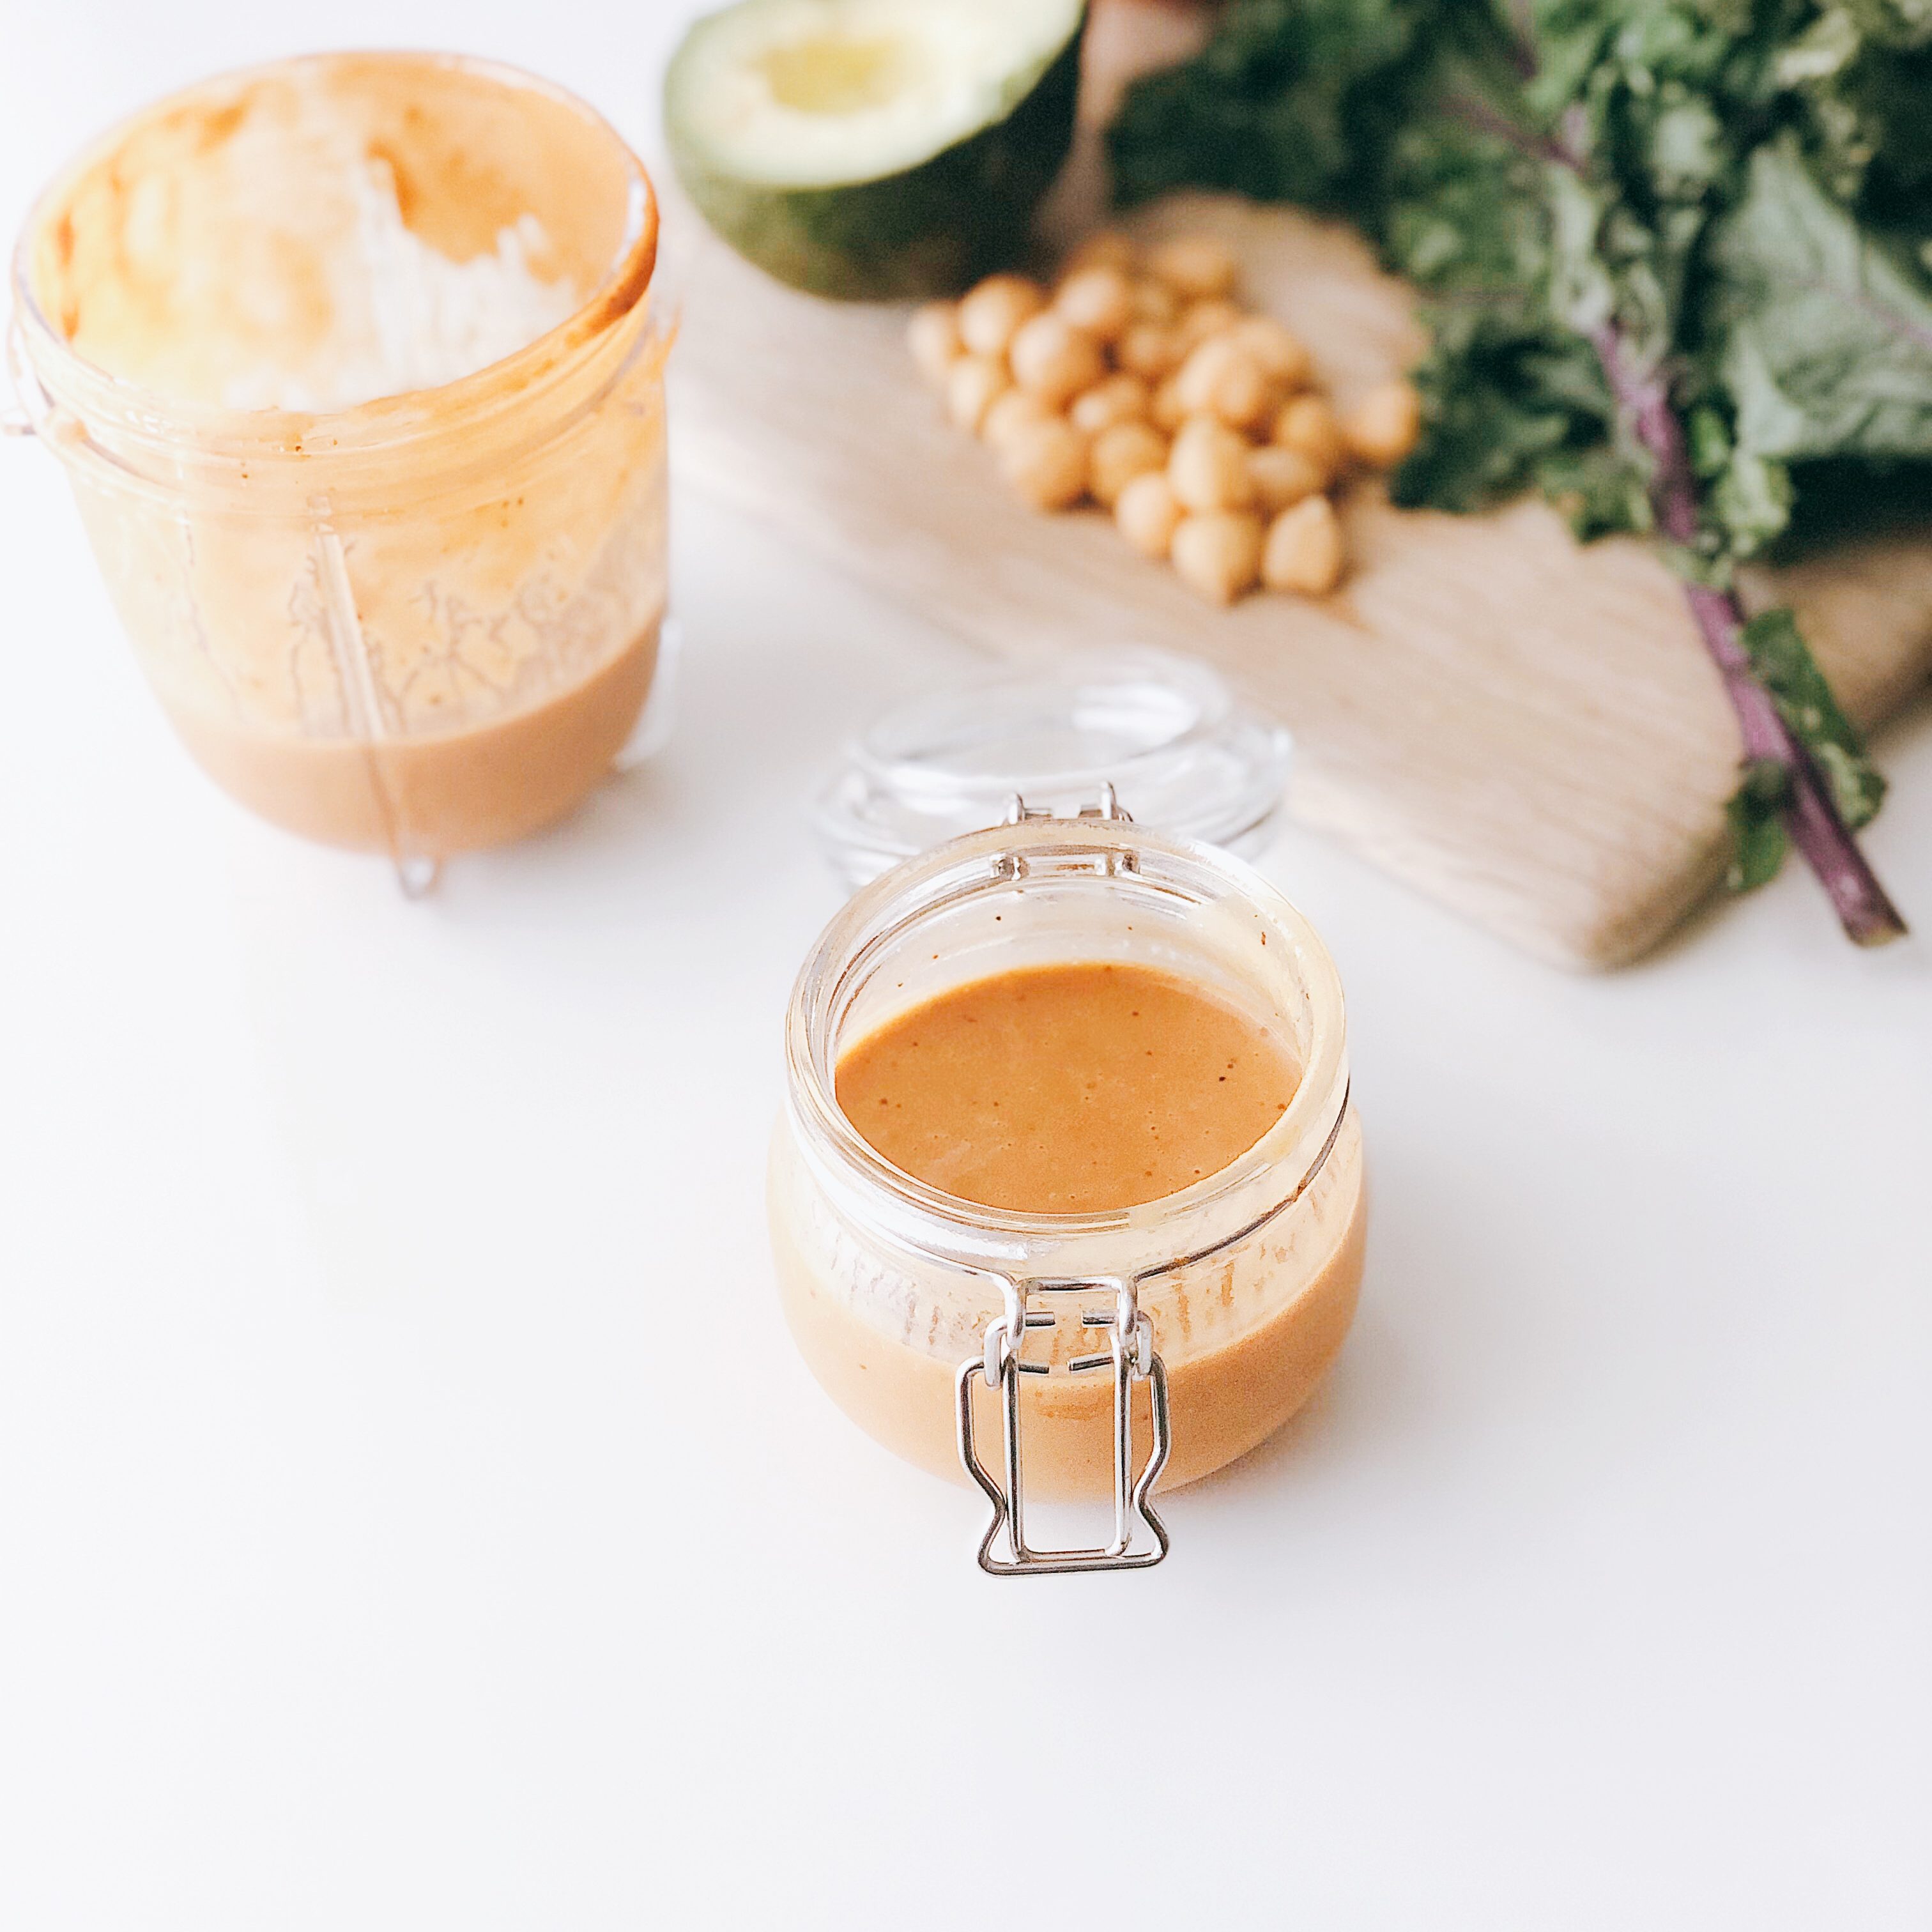 5-minute ginger miso dressing with vegetables on a cutting board in the background